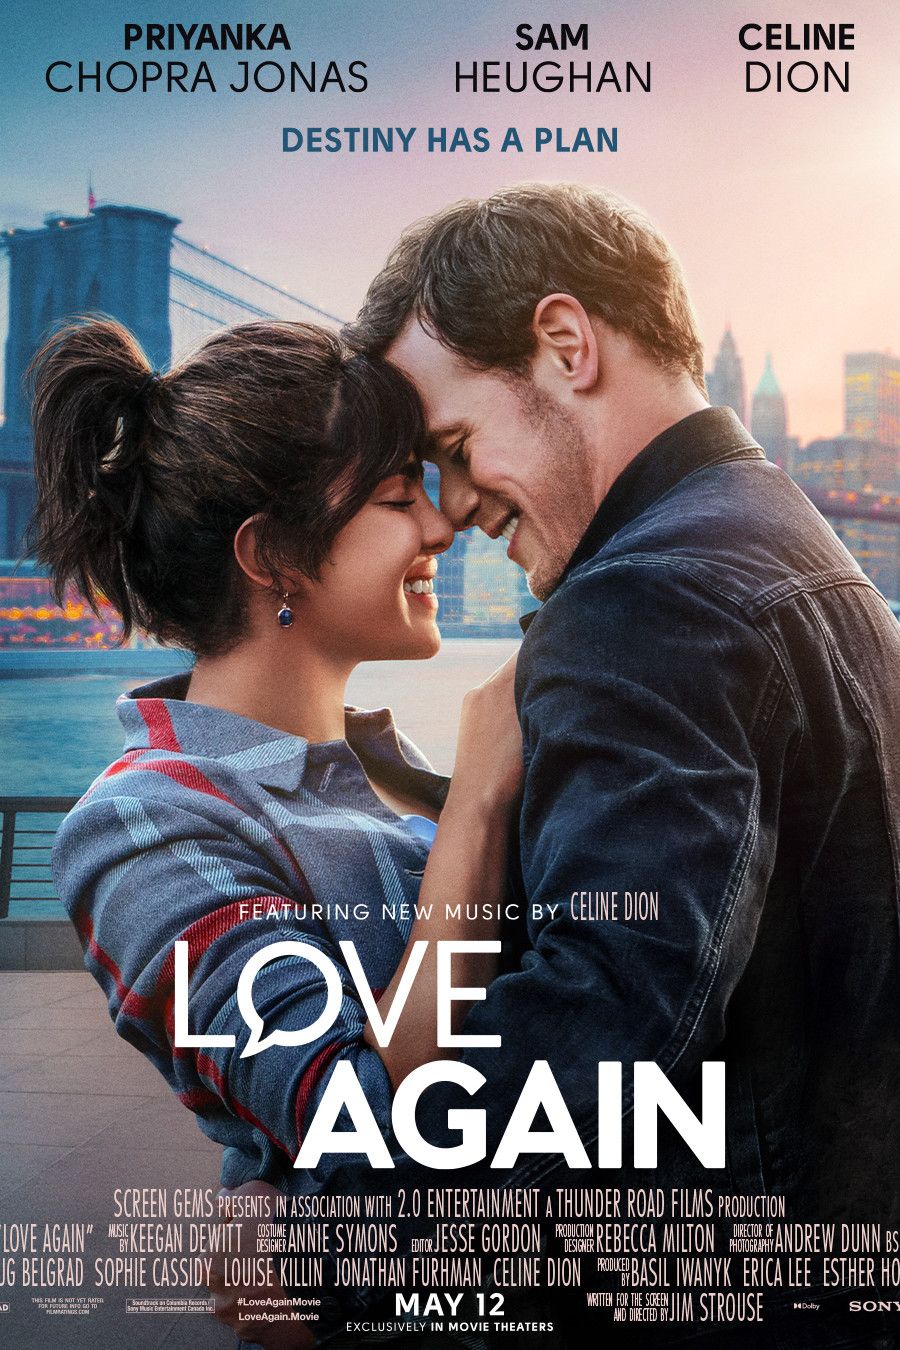 love movie review 2023